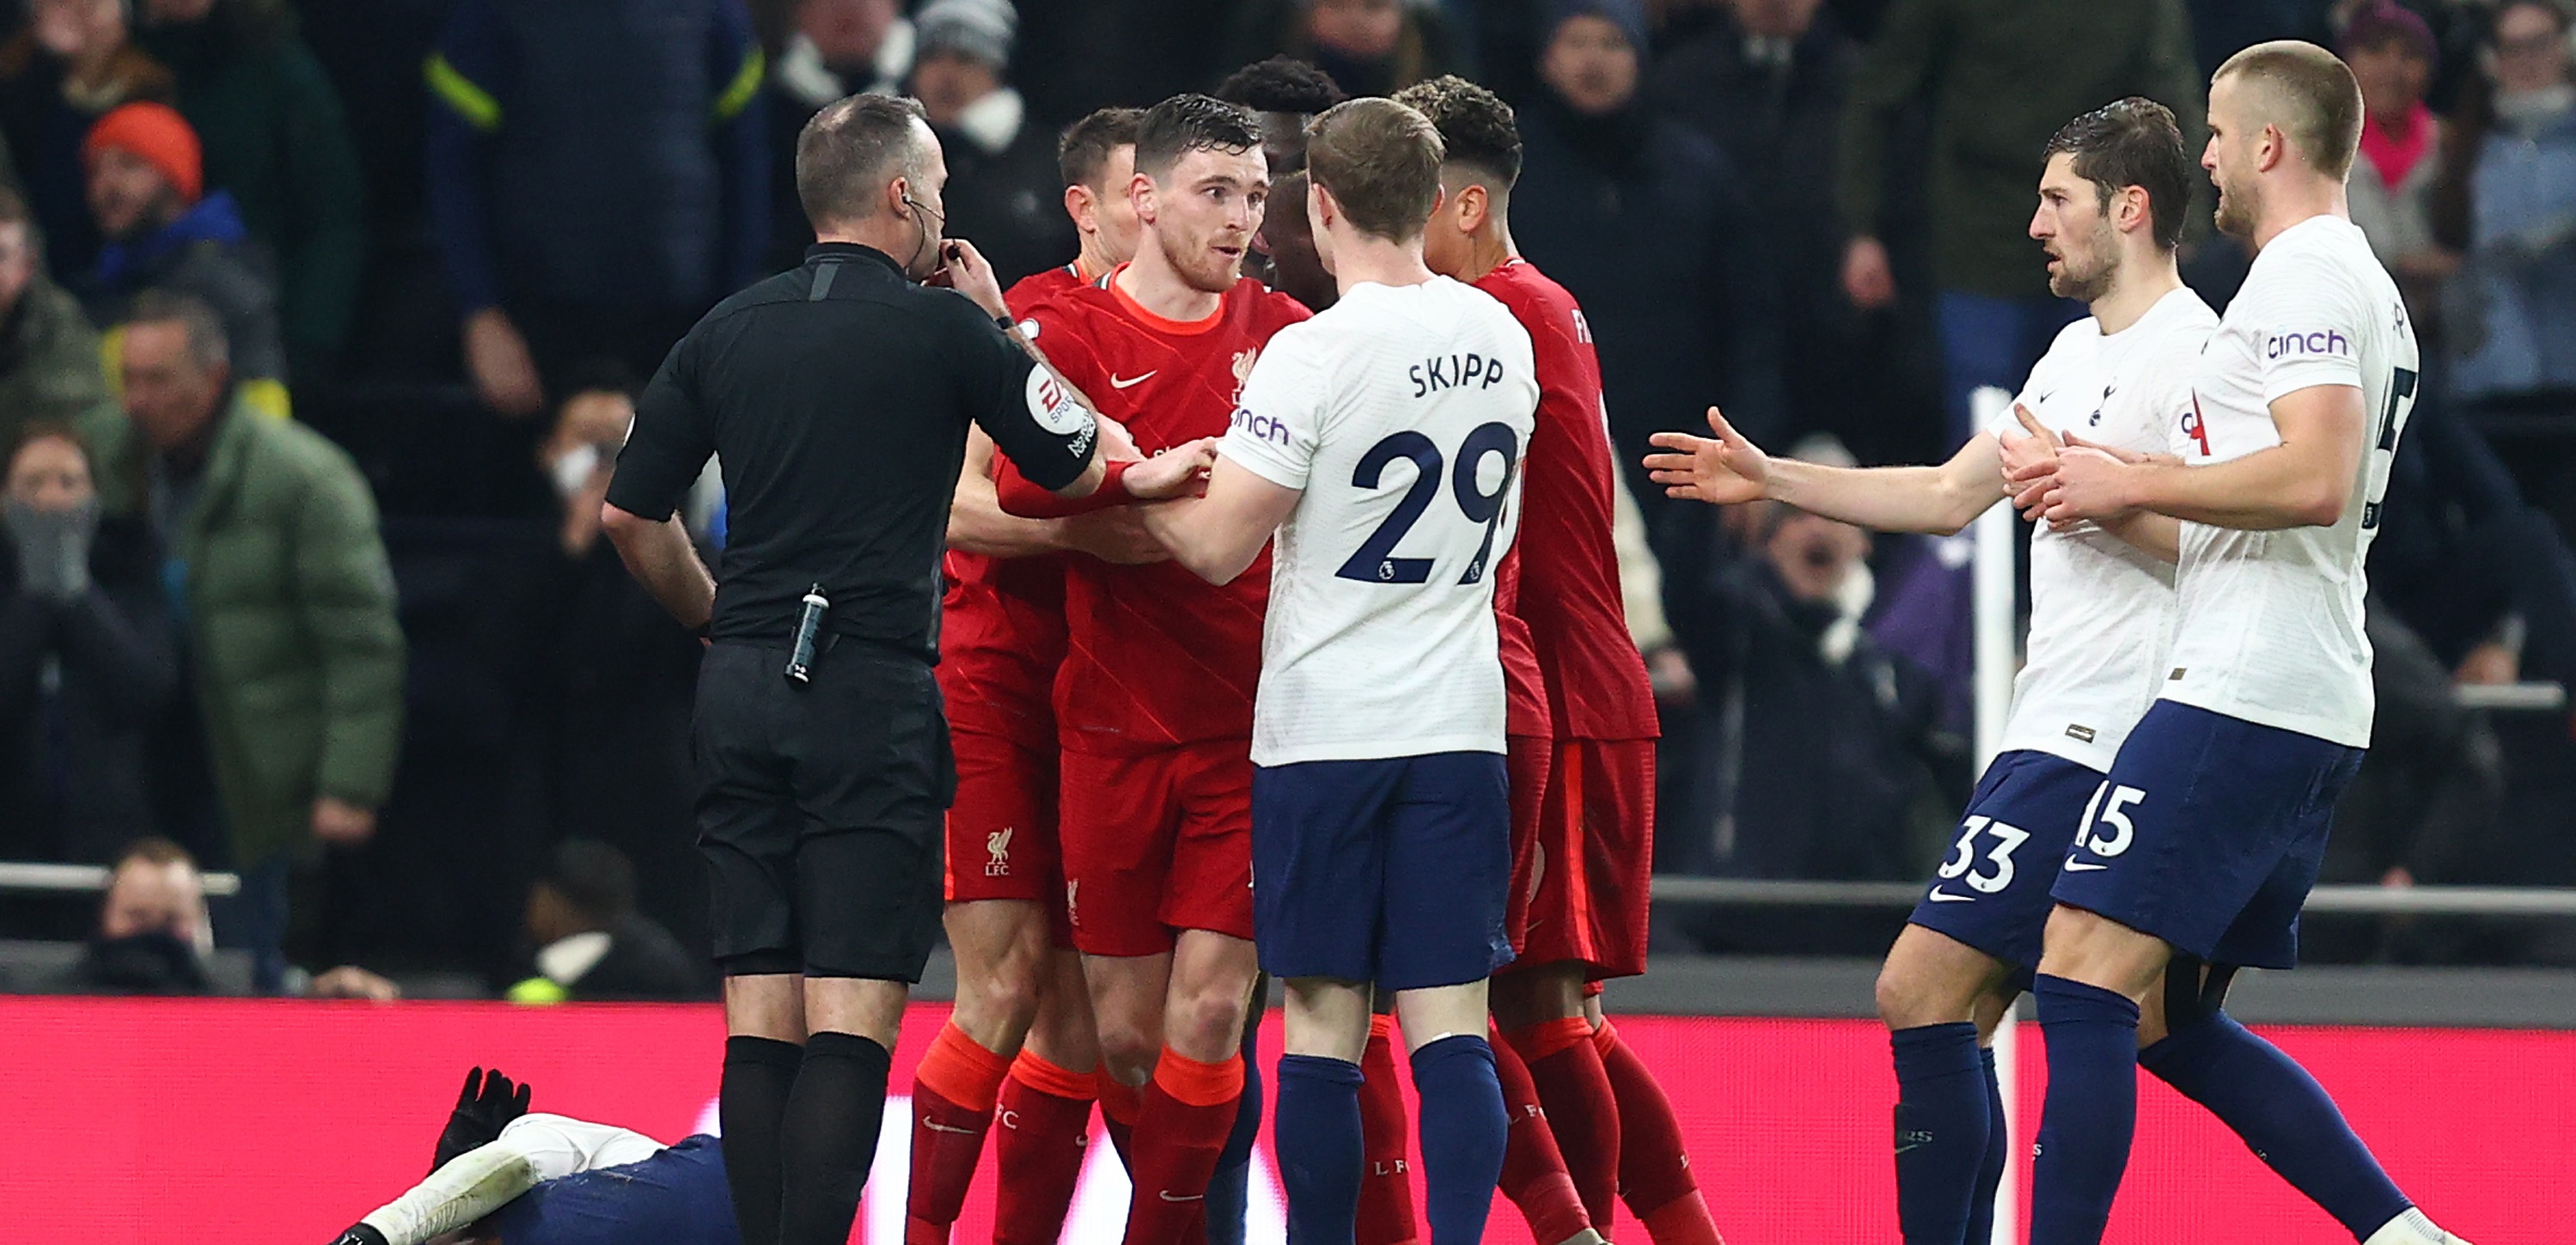 Italy legend suggests Robertson & other Liverpool players would have received 10-match ban in Serie A for Spurs antics